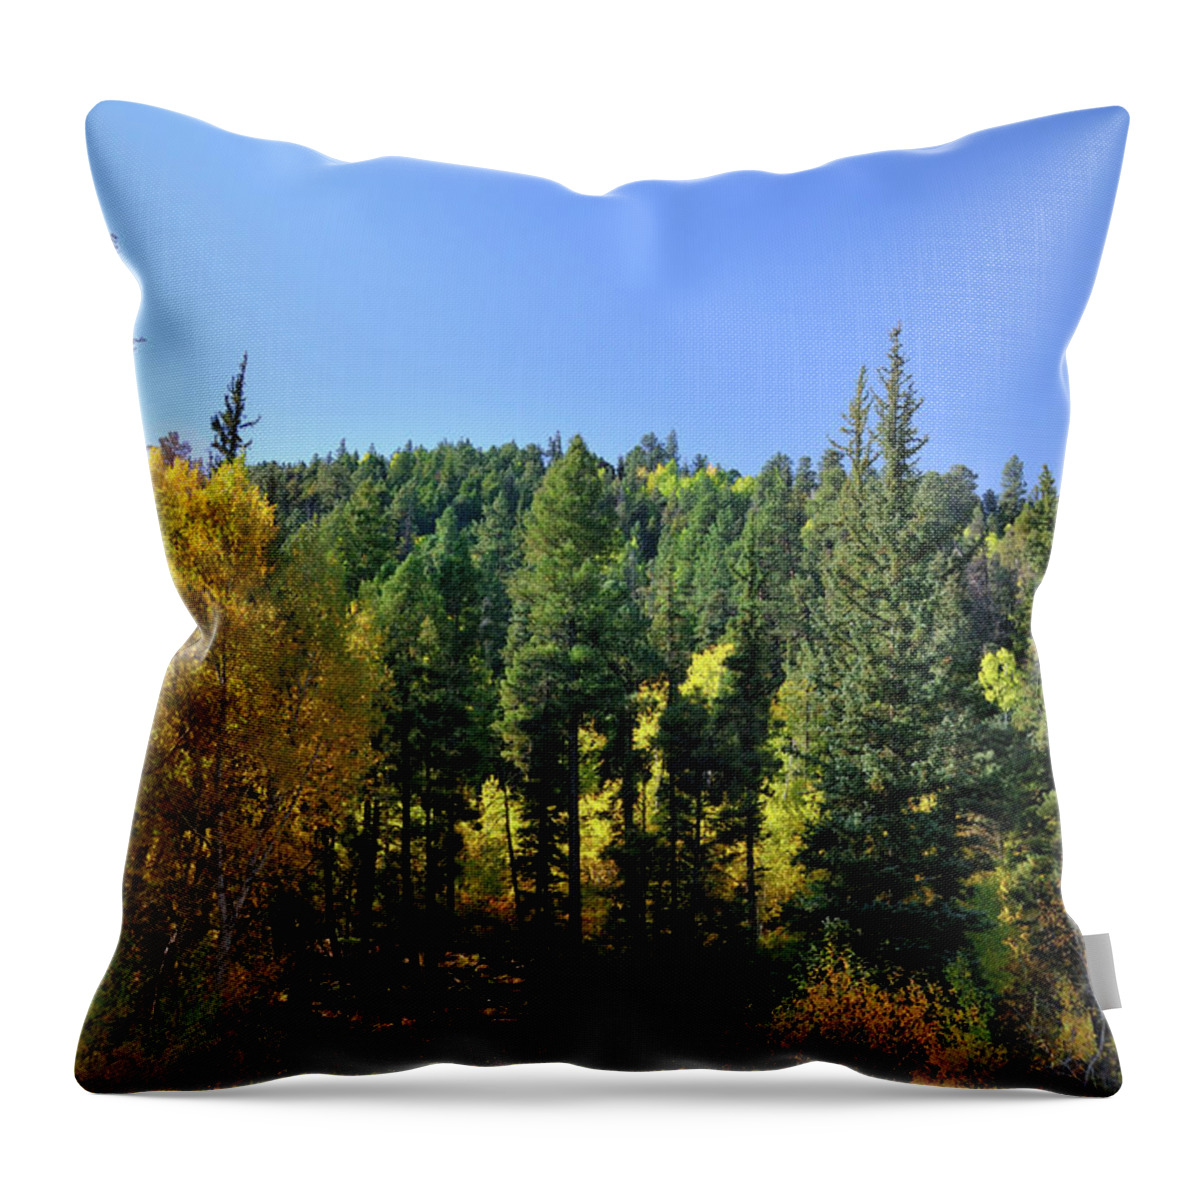 Landscape Throw Pillow featuring the photograph Aspen And Cottonwood In Concert by Ron Cline